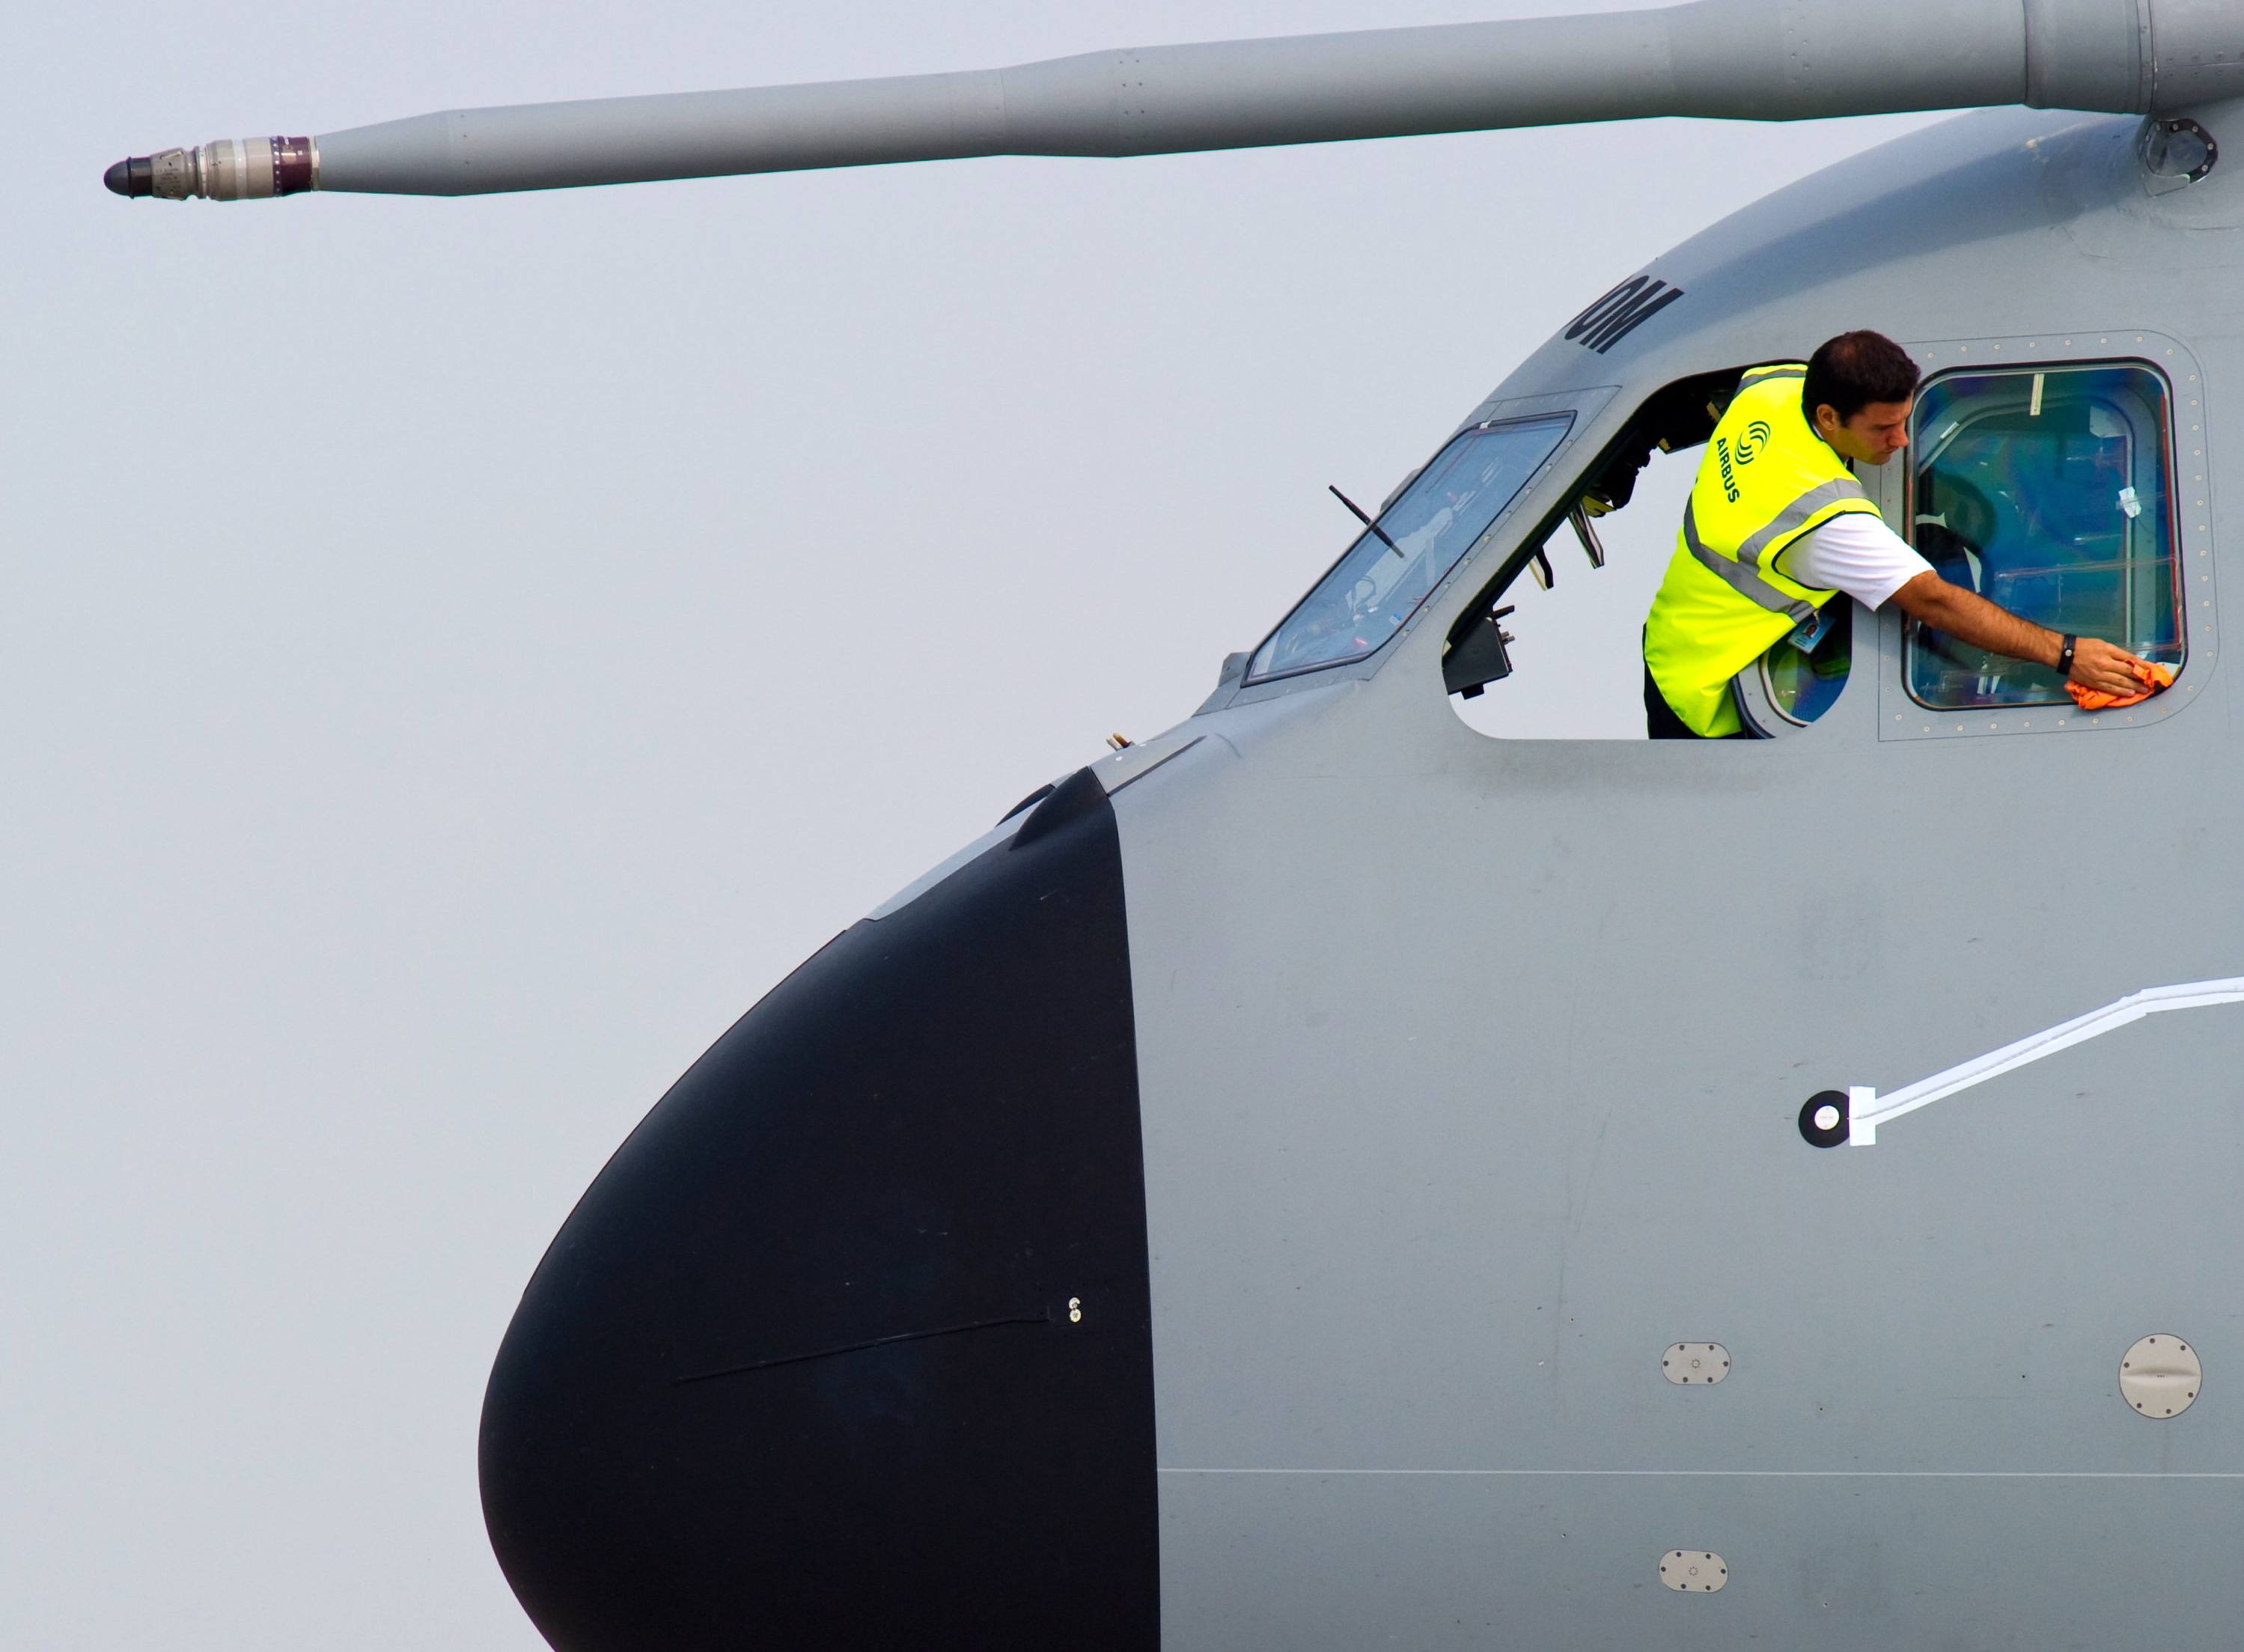 A man cleans the cockpit windows of an Airplane